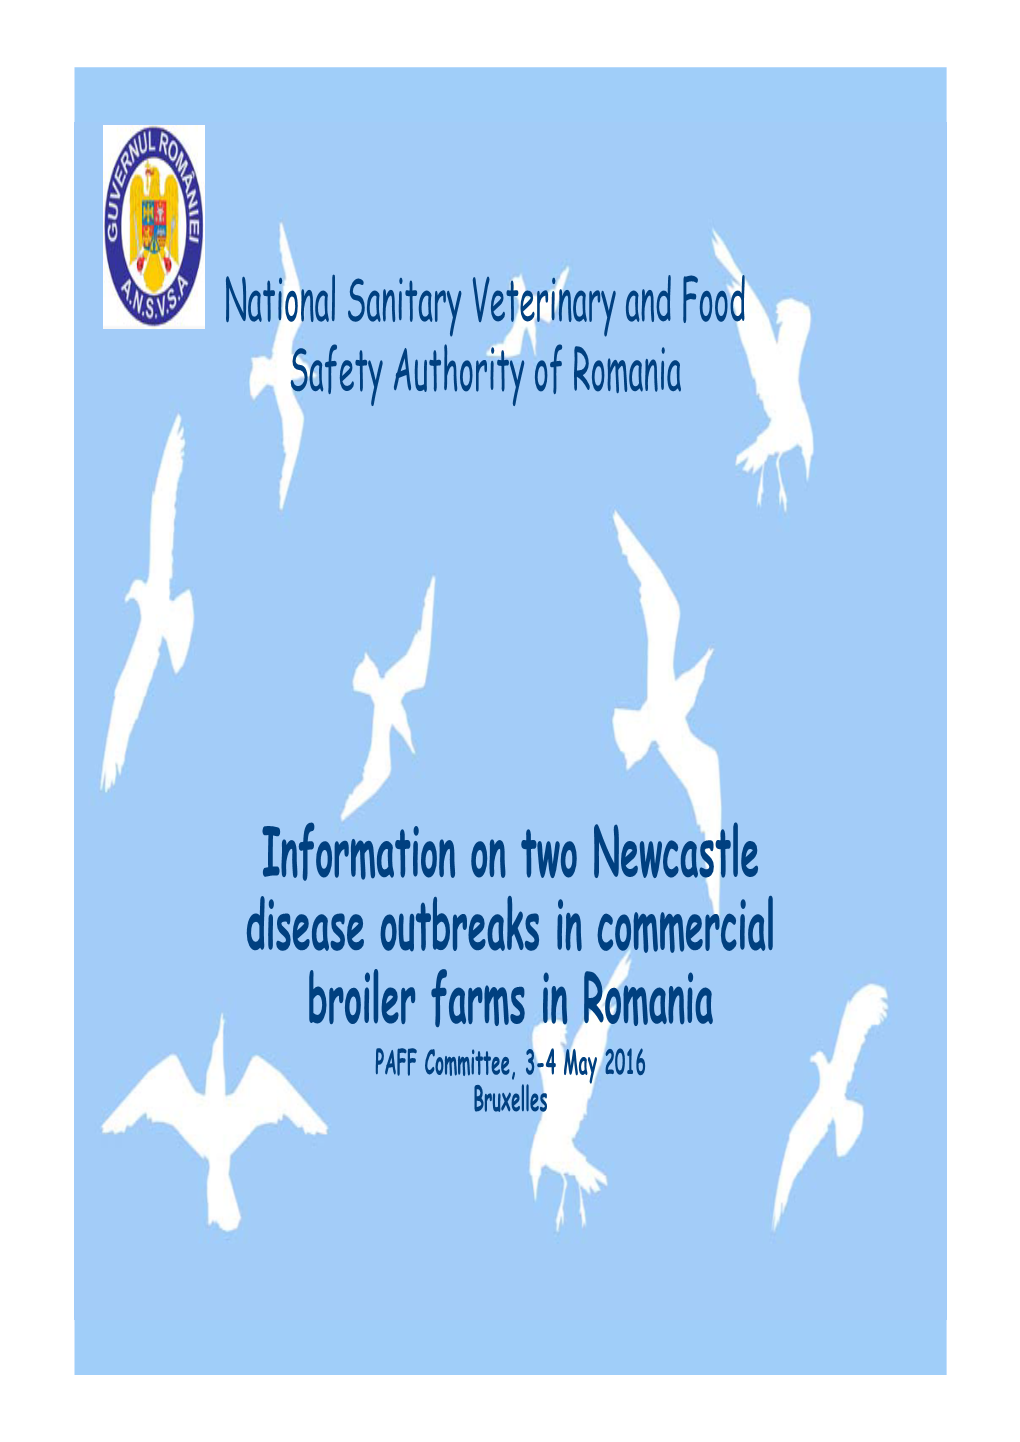 Newcastle Disease Outbreaks in Commercial Broiler Farms in Romania PAFF Committee, 3-4 May 2016 Bruxelles Location of the Outbreaks